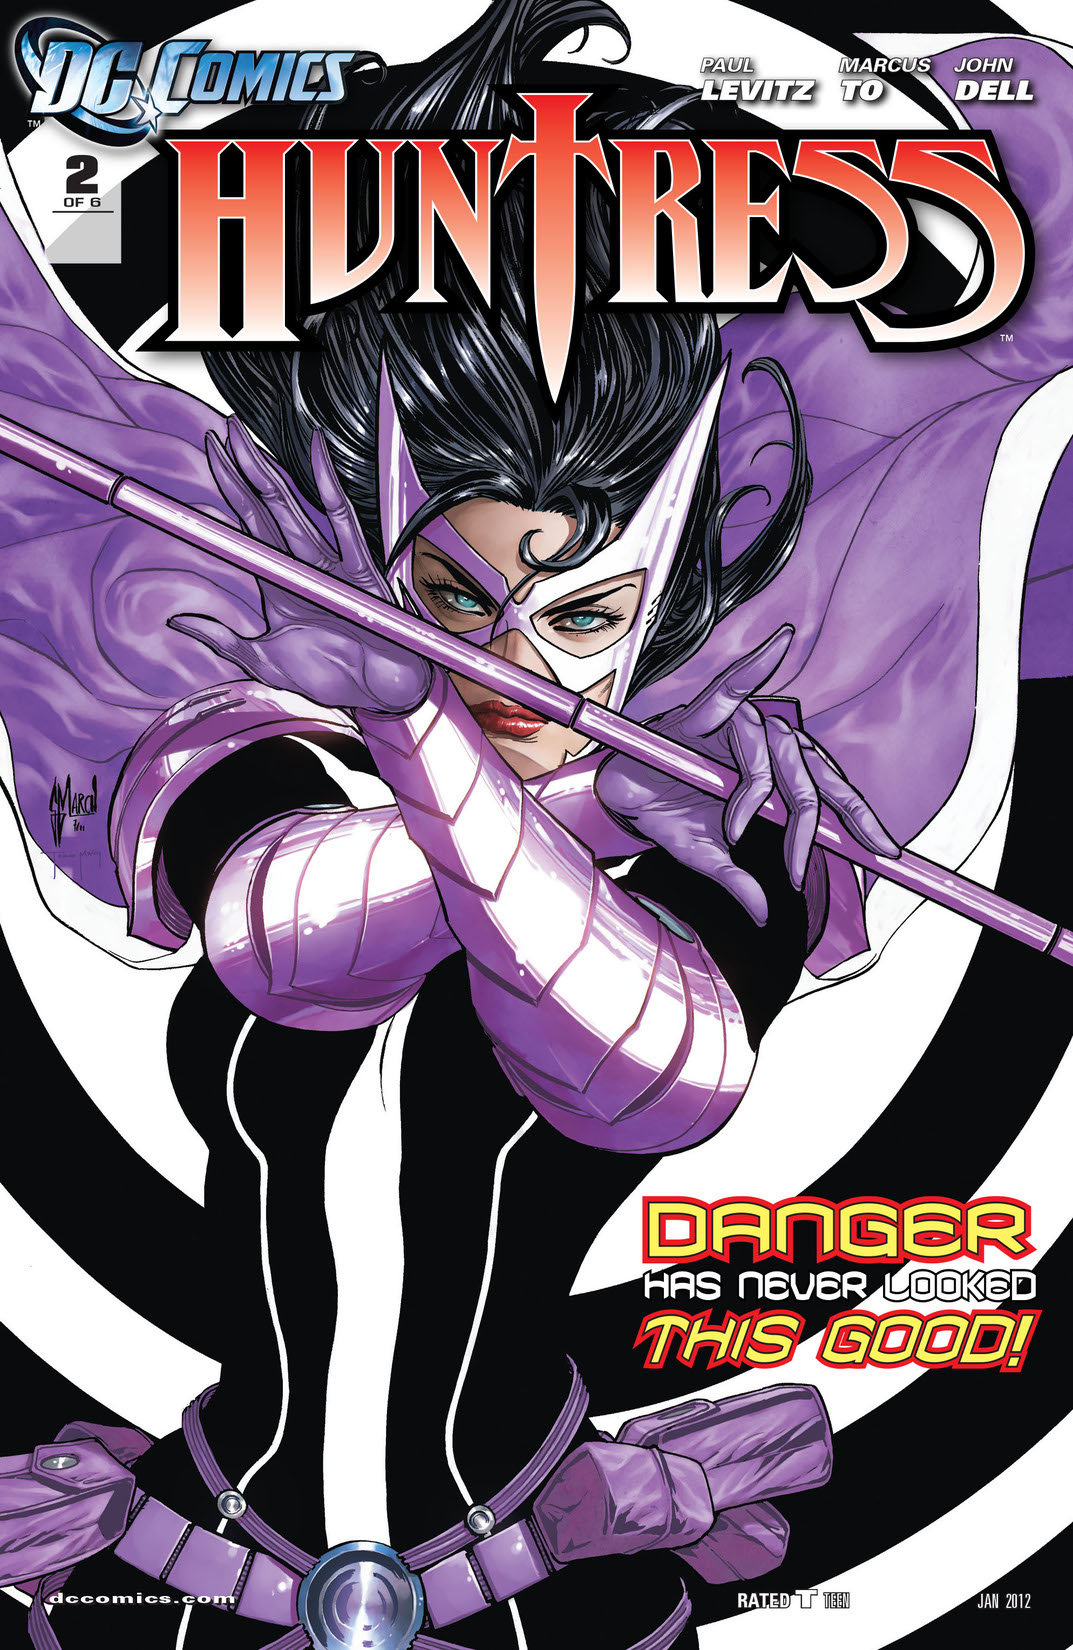 Huntress #2 preview images